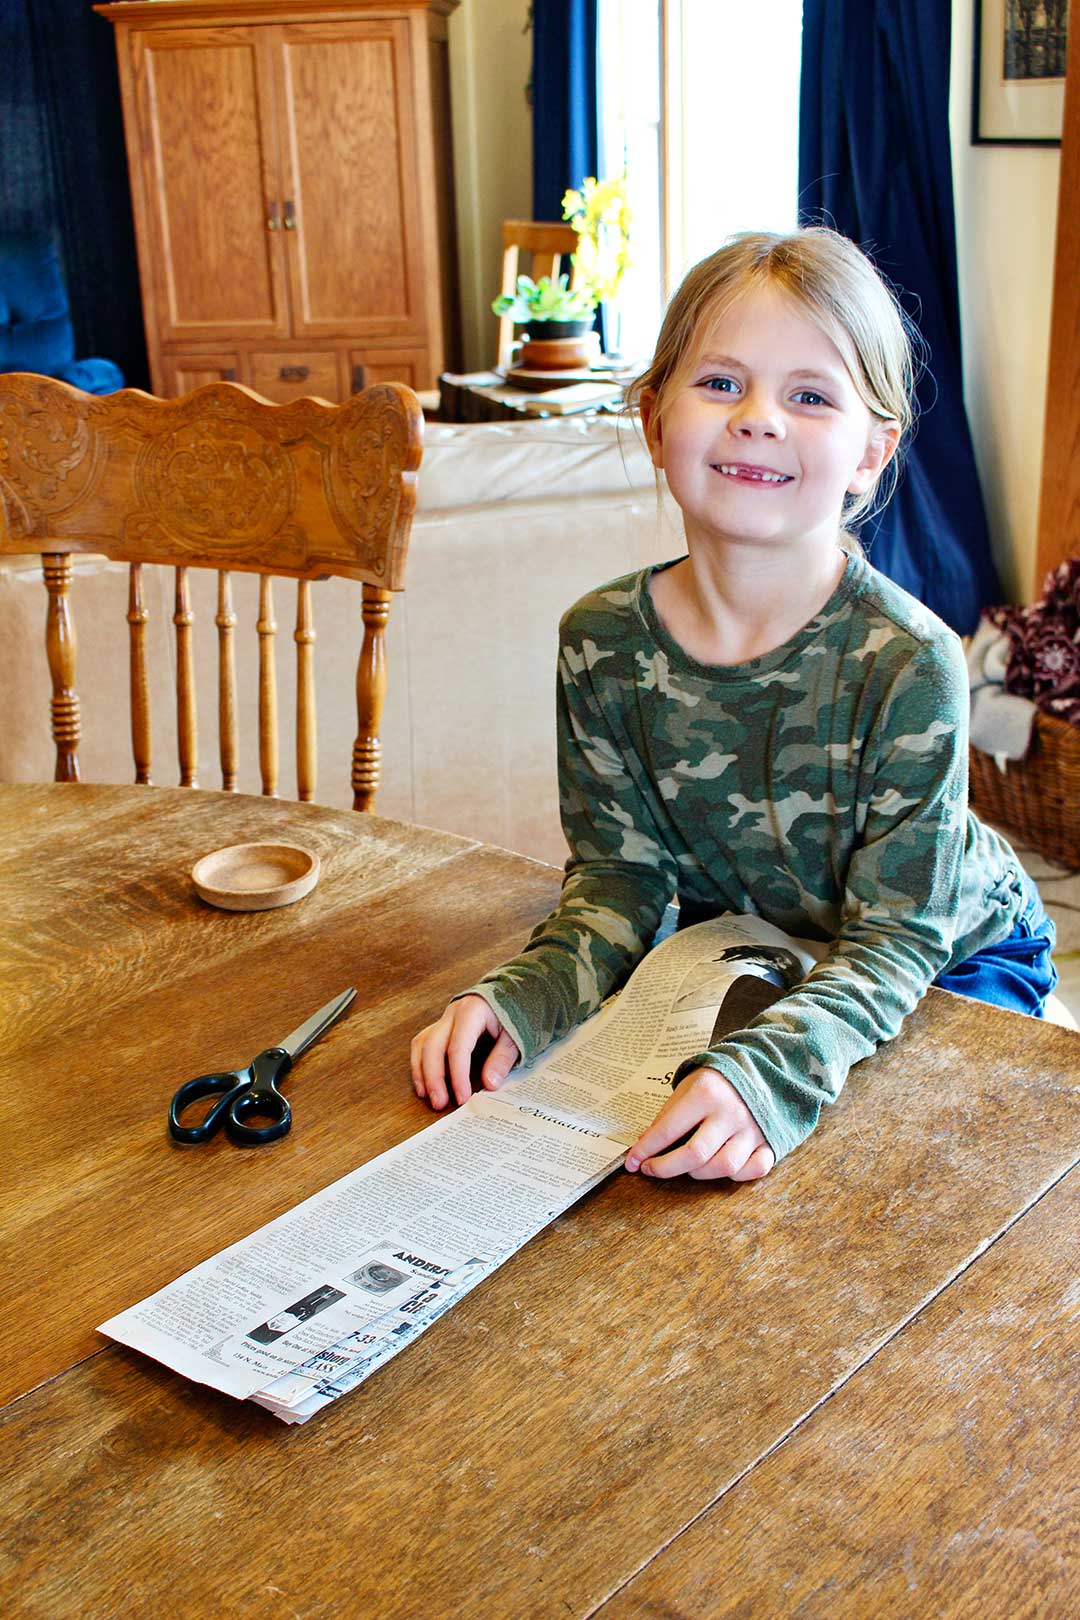 Young girl with blonde hair, missing front teeth and a camp shirt smiles at camera while at kitchen table holding large strips of newspaper.